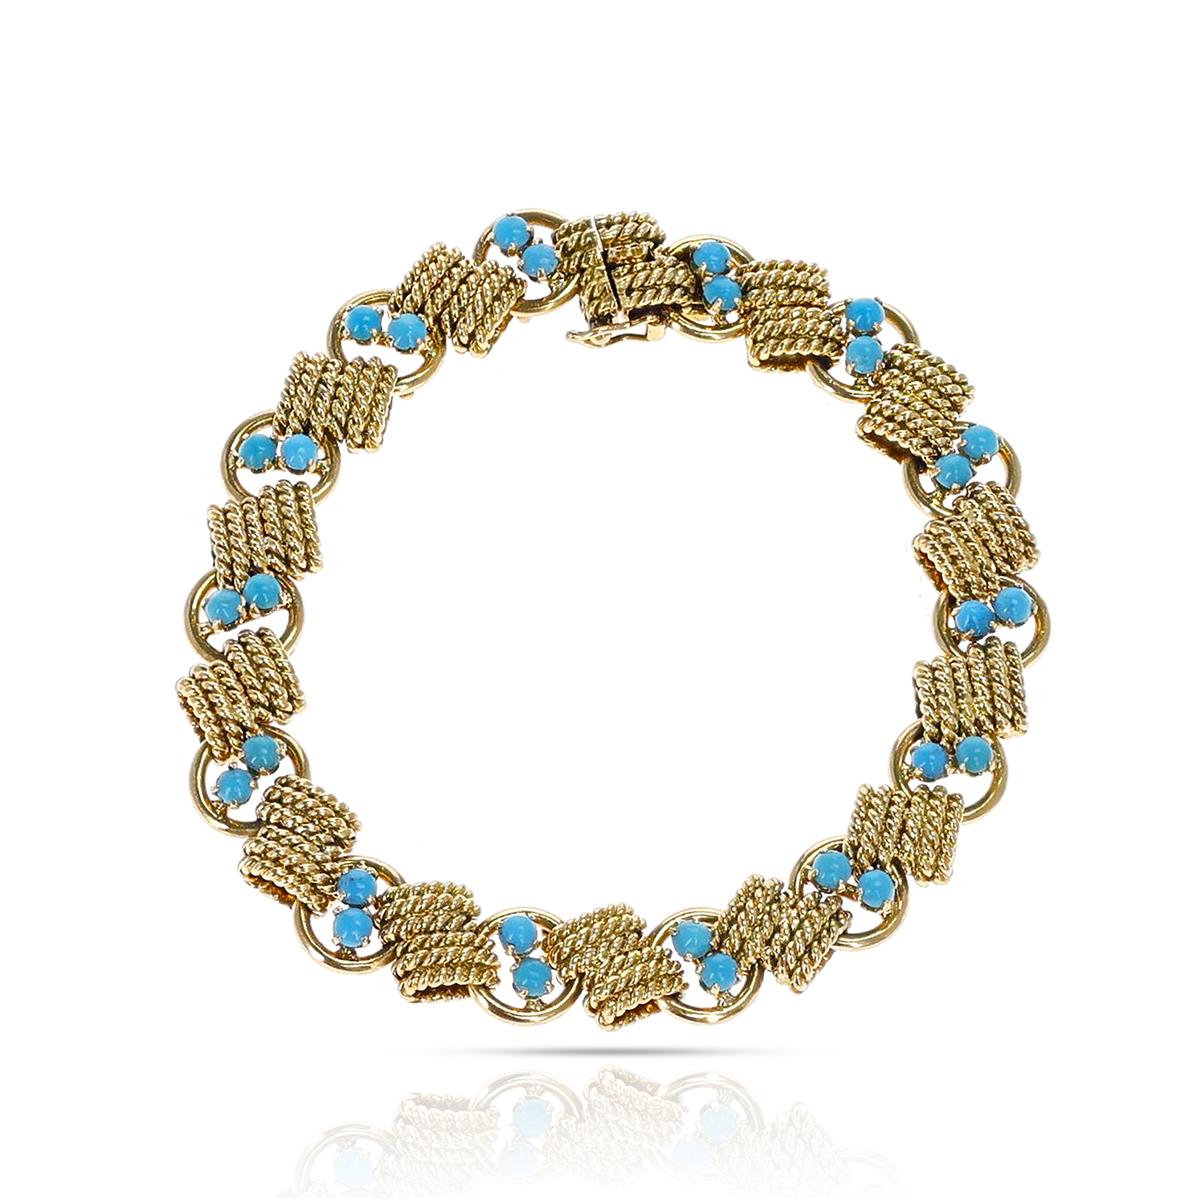 Van Cleef & Arpels Turquoise and Twisted Gold Bracelet, 18K Yellow In Excellent Condition For Sale In New York, NY